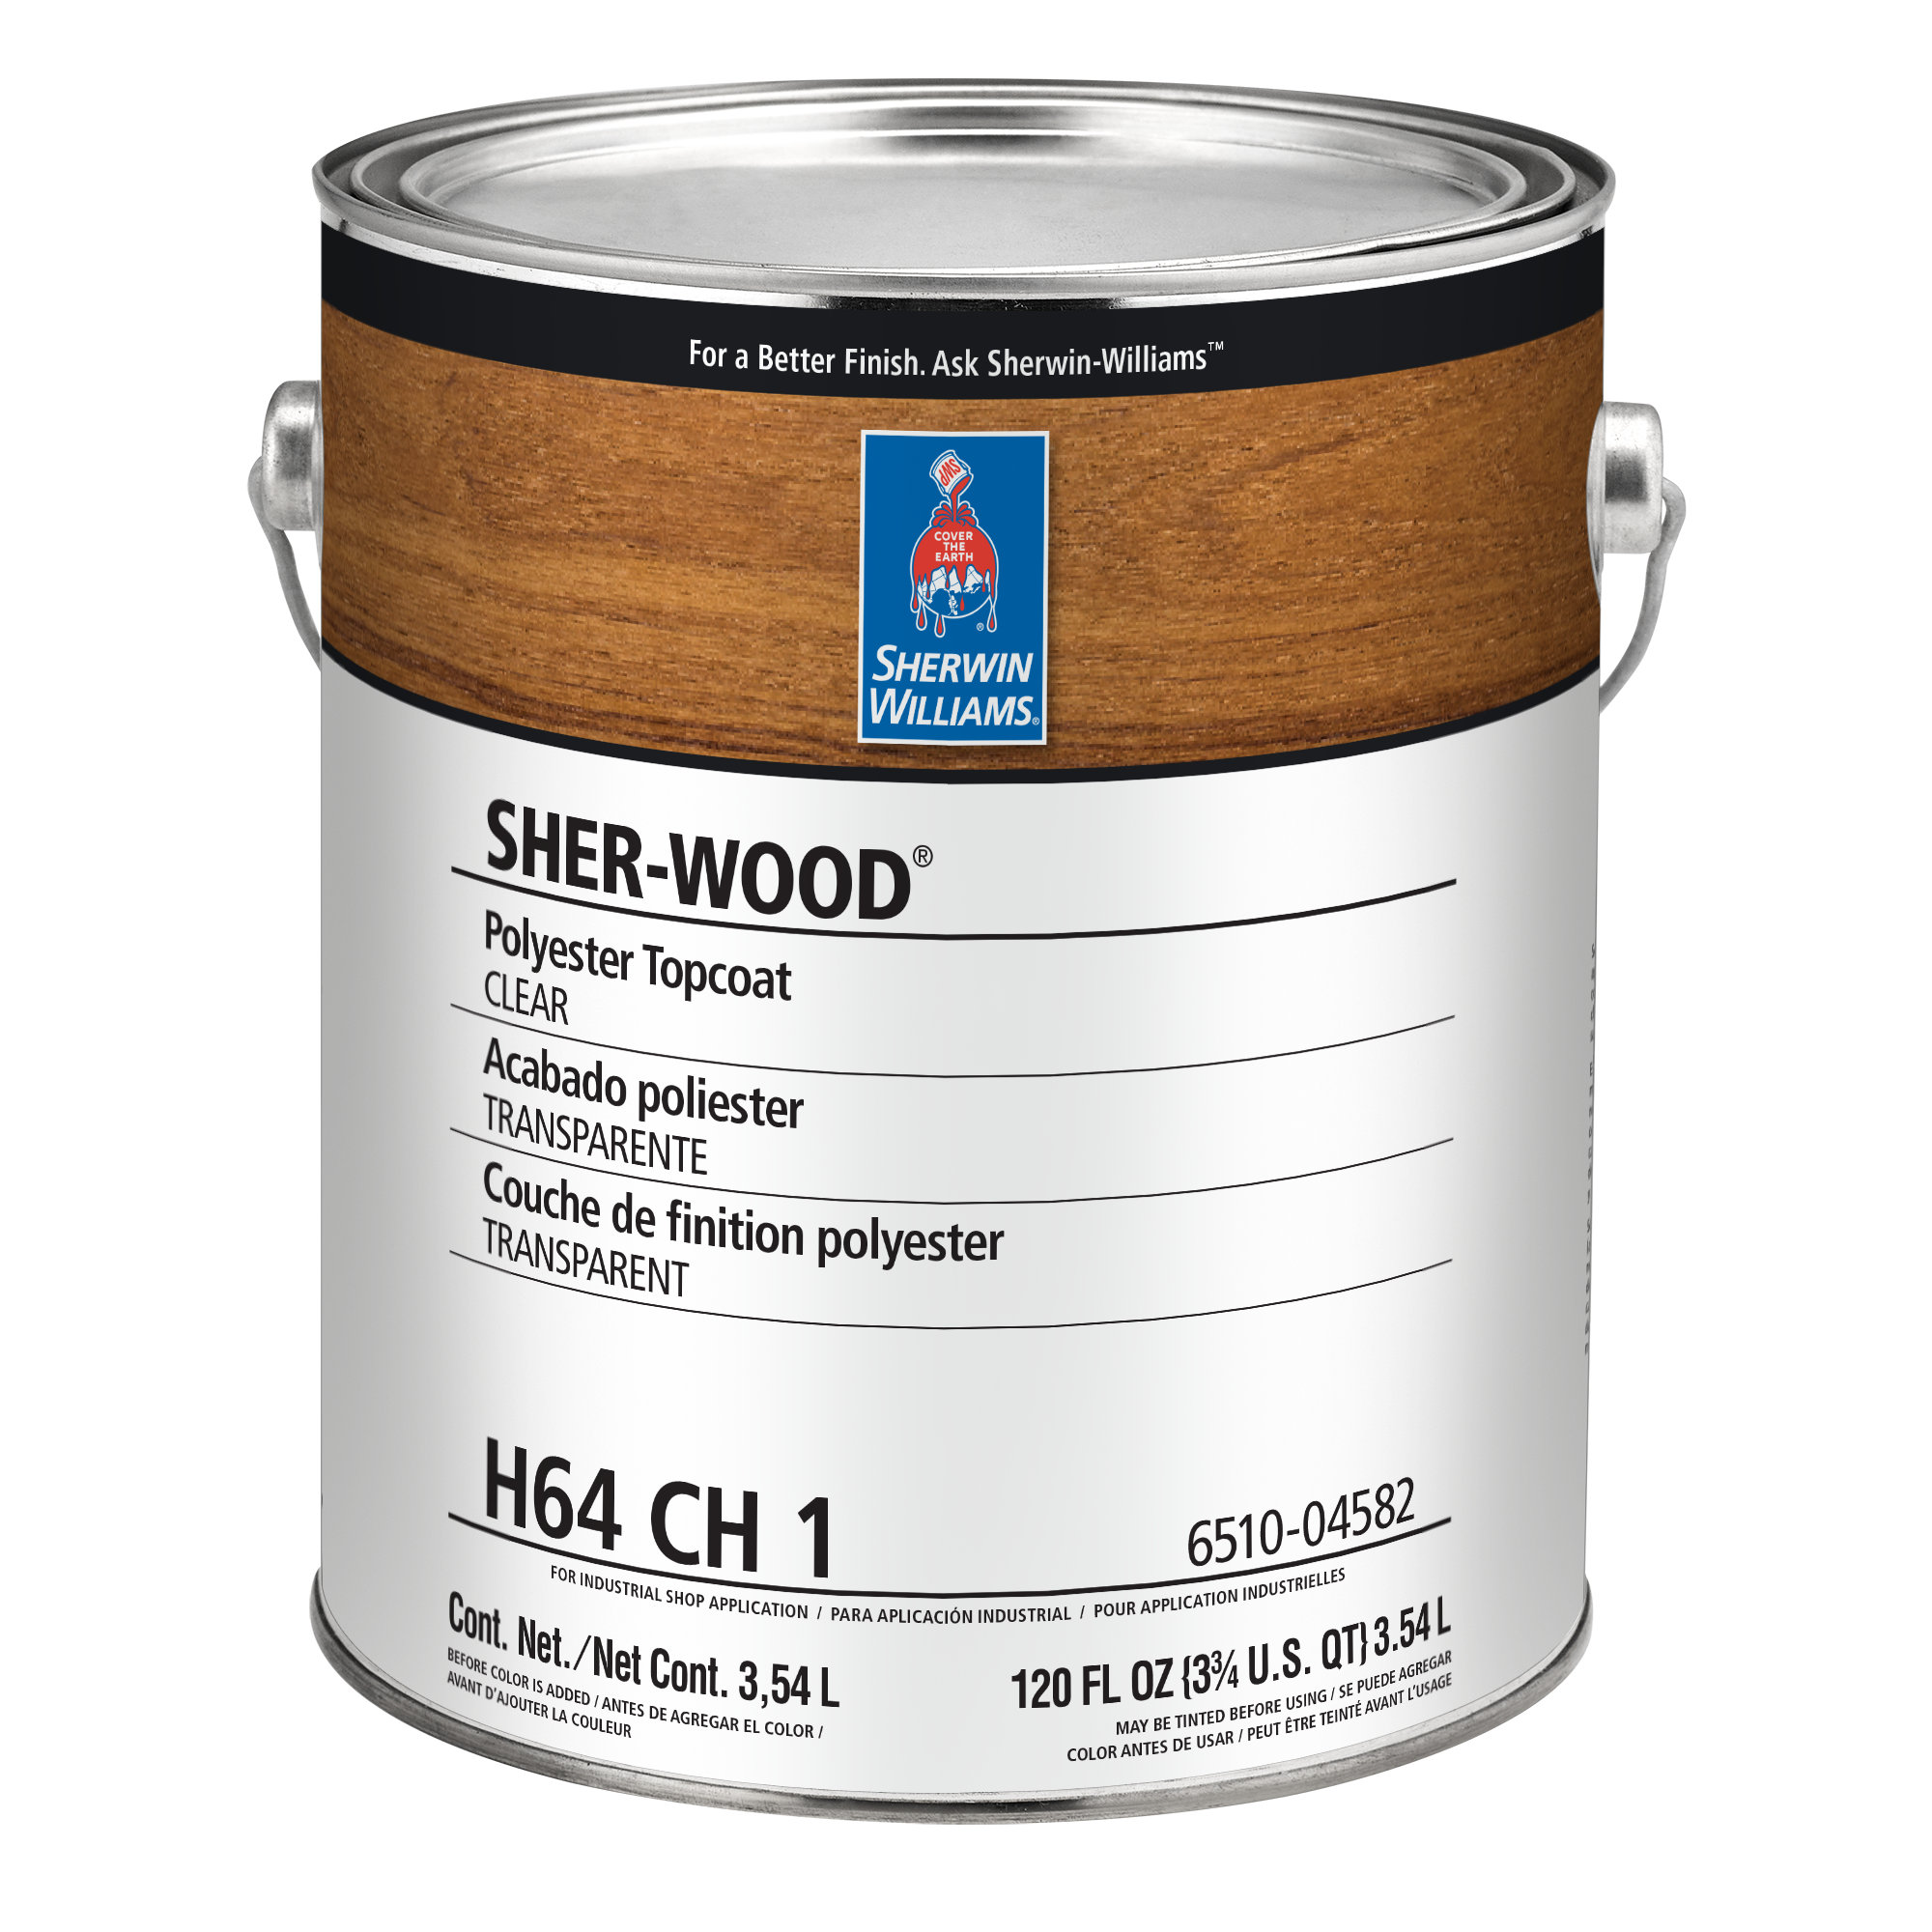 SHER-WOOD Polyester Topcoat